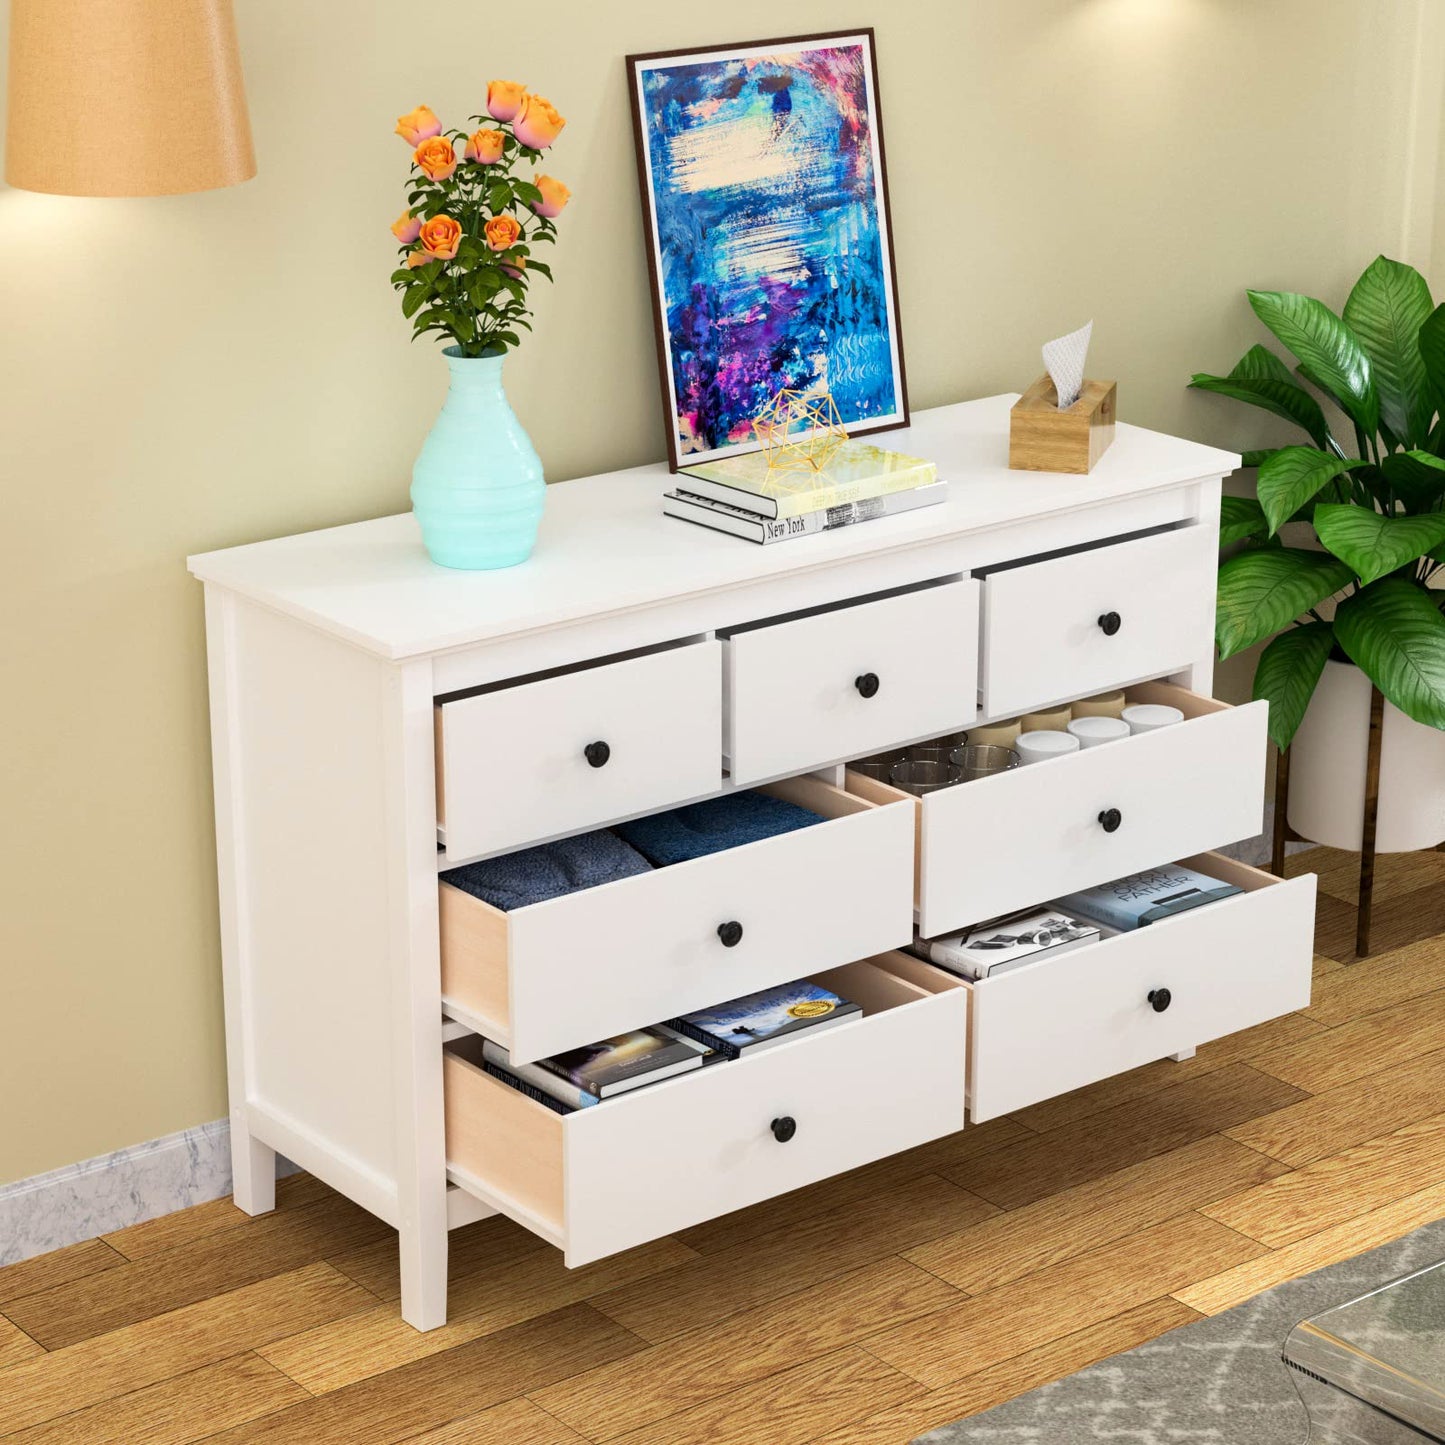 CARPETNAL White Modern Dresser for Bedroom, 7 Drawer Double Dresser with Wide Drawer and Metal Handles, Wood Dressers & Chests of Drawers for